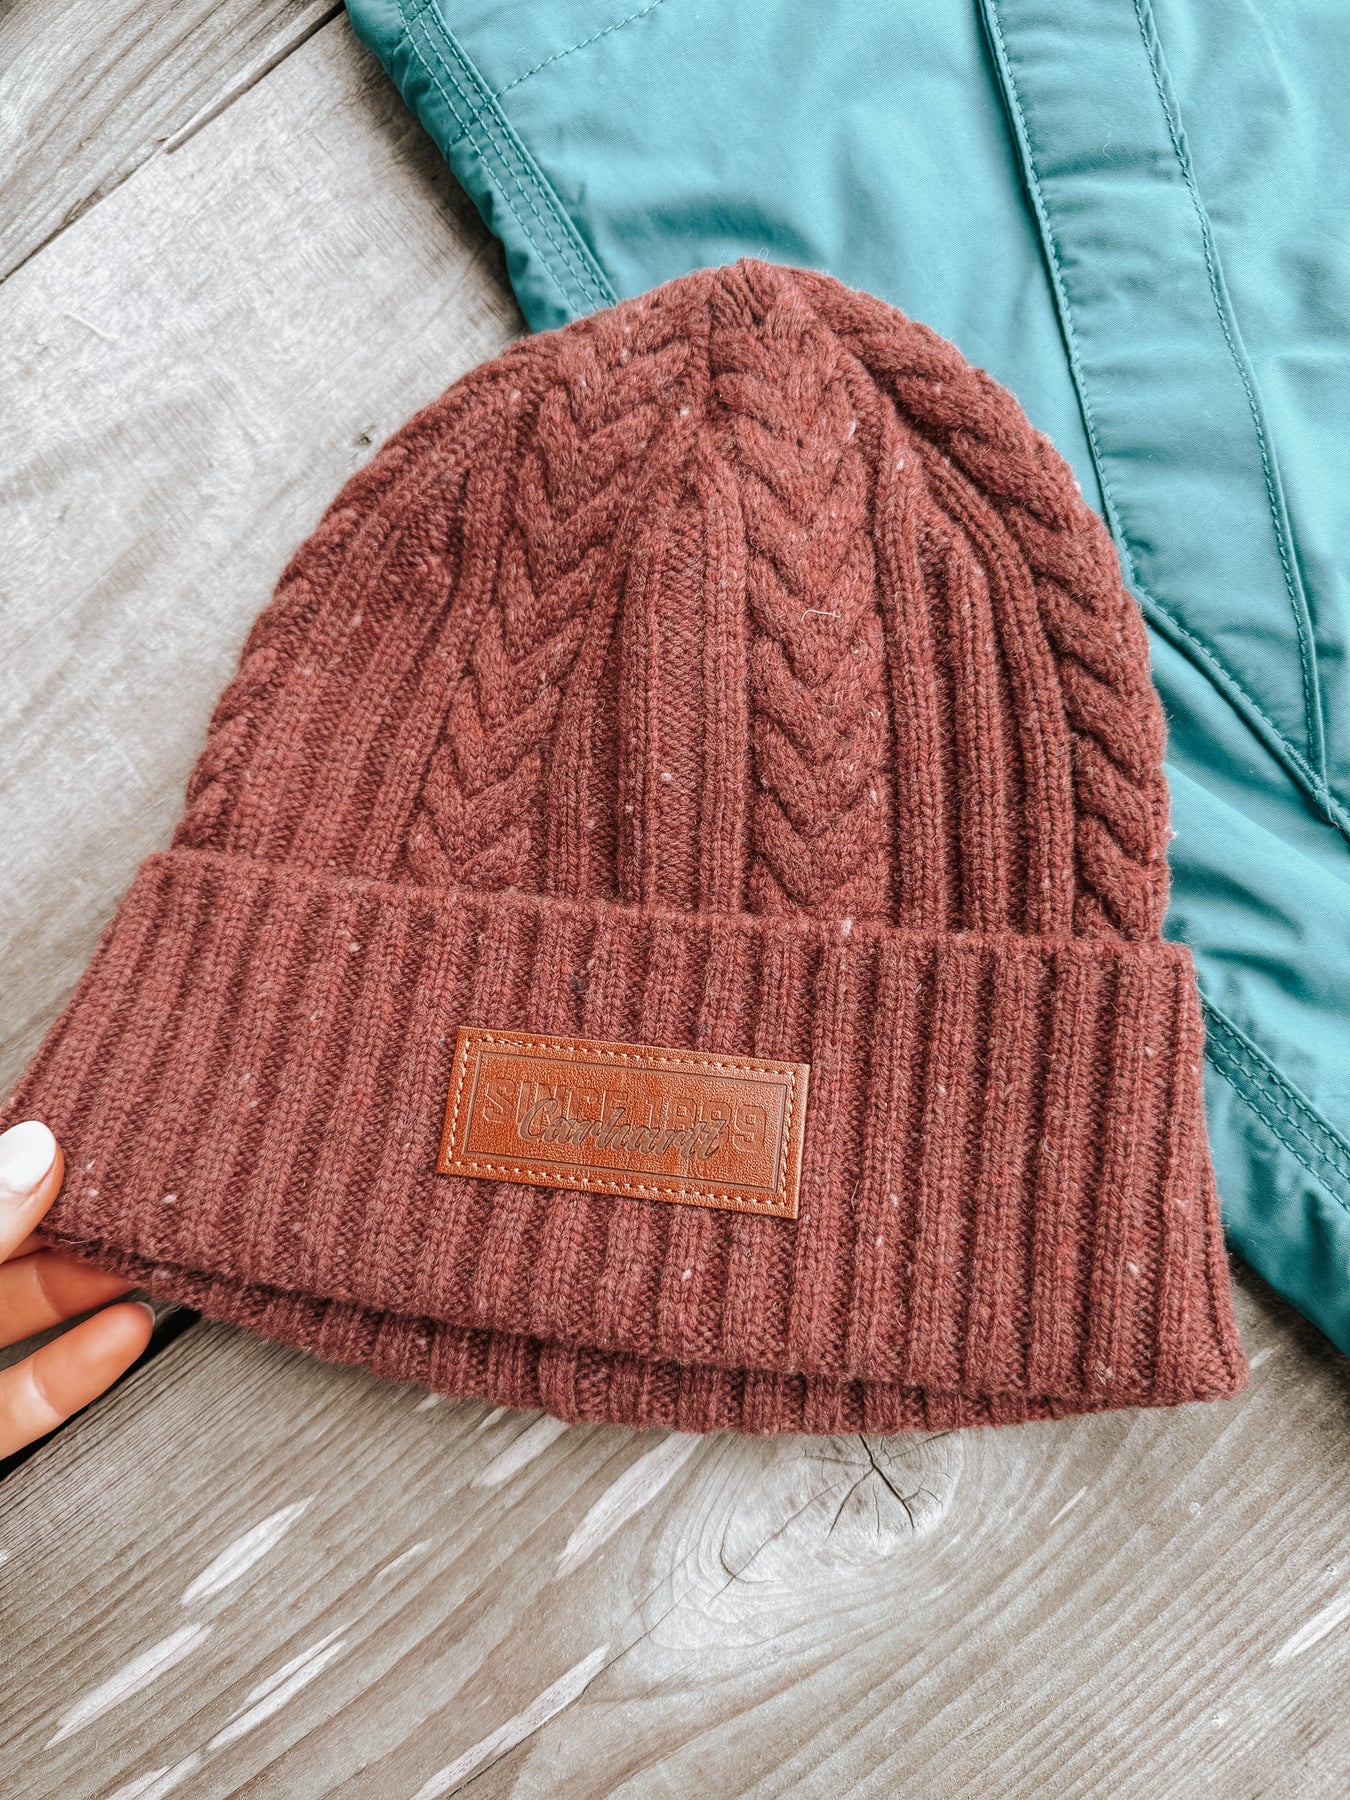 Carhartt Rib Knit Fisherman Beanie in Sable – Boot Country